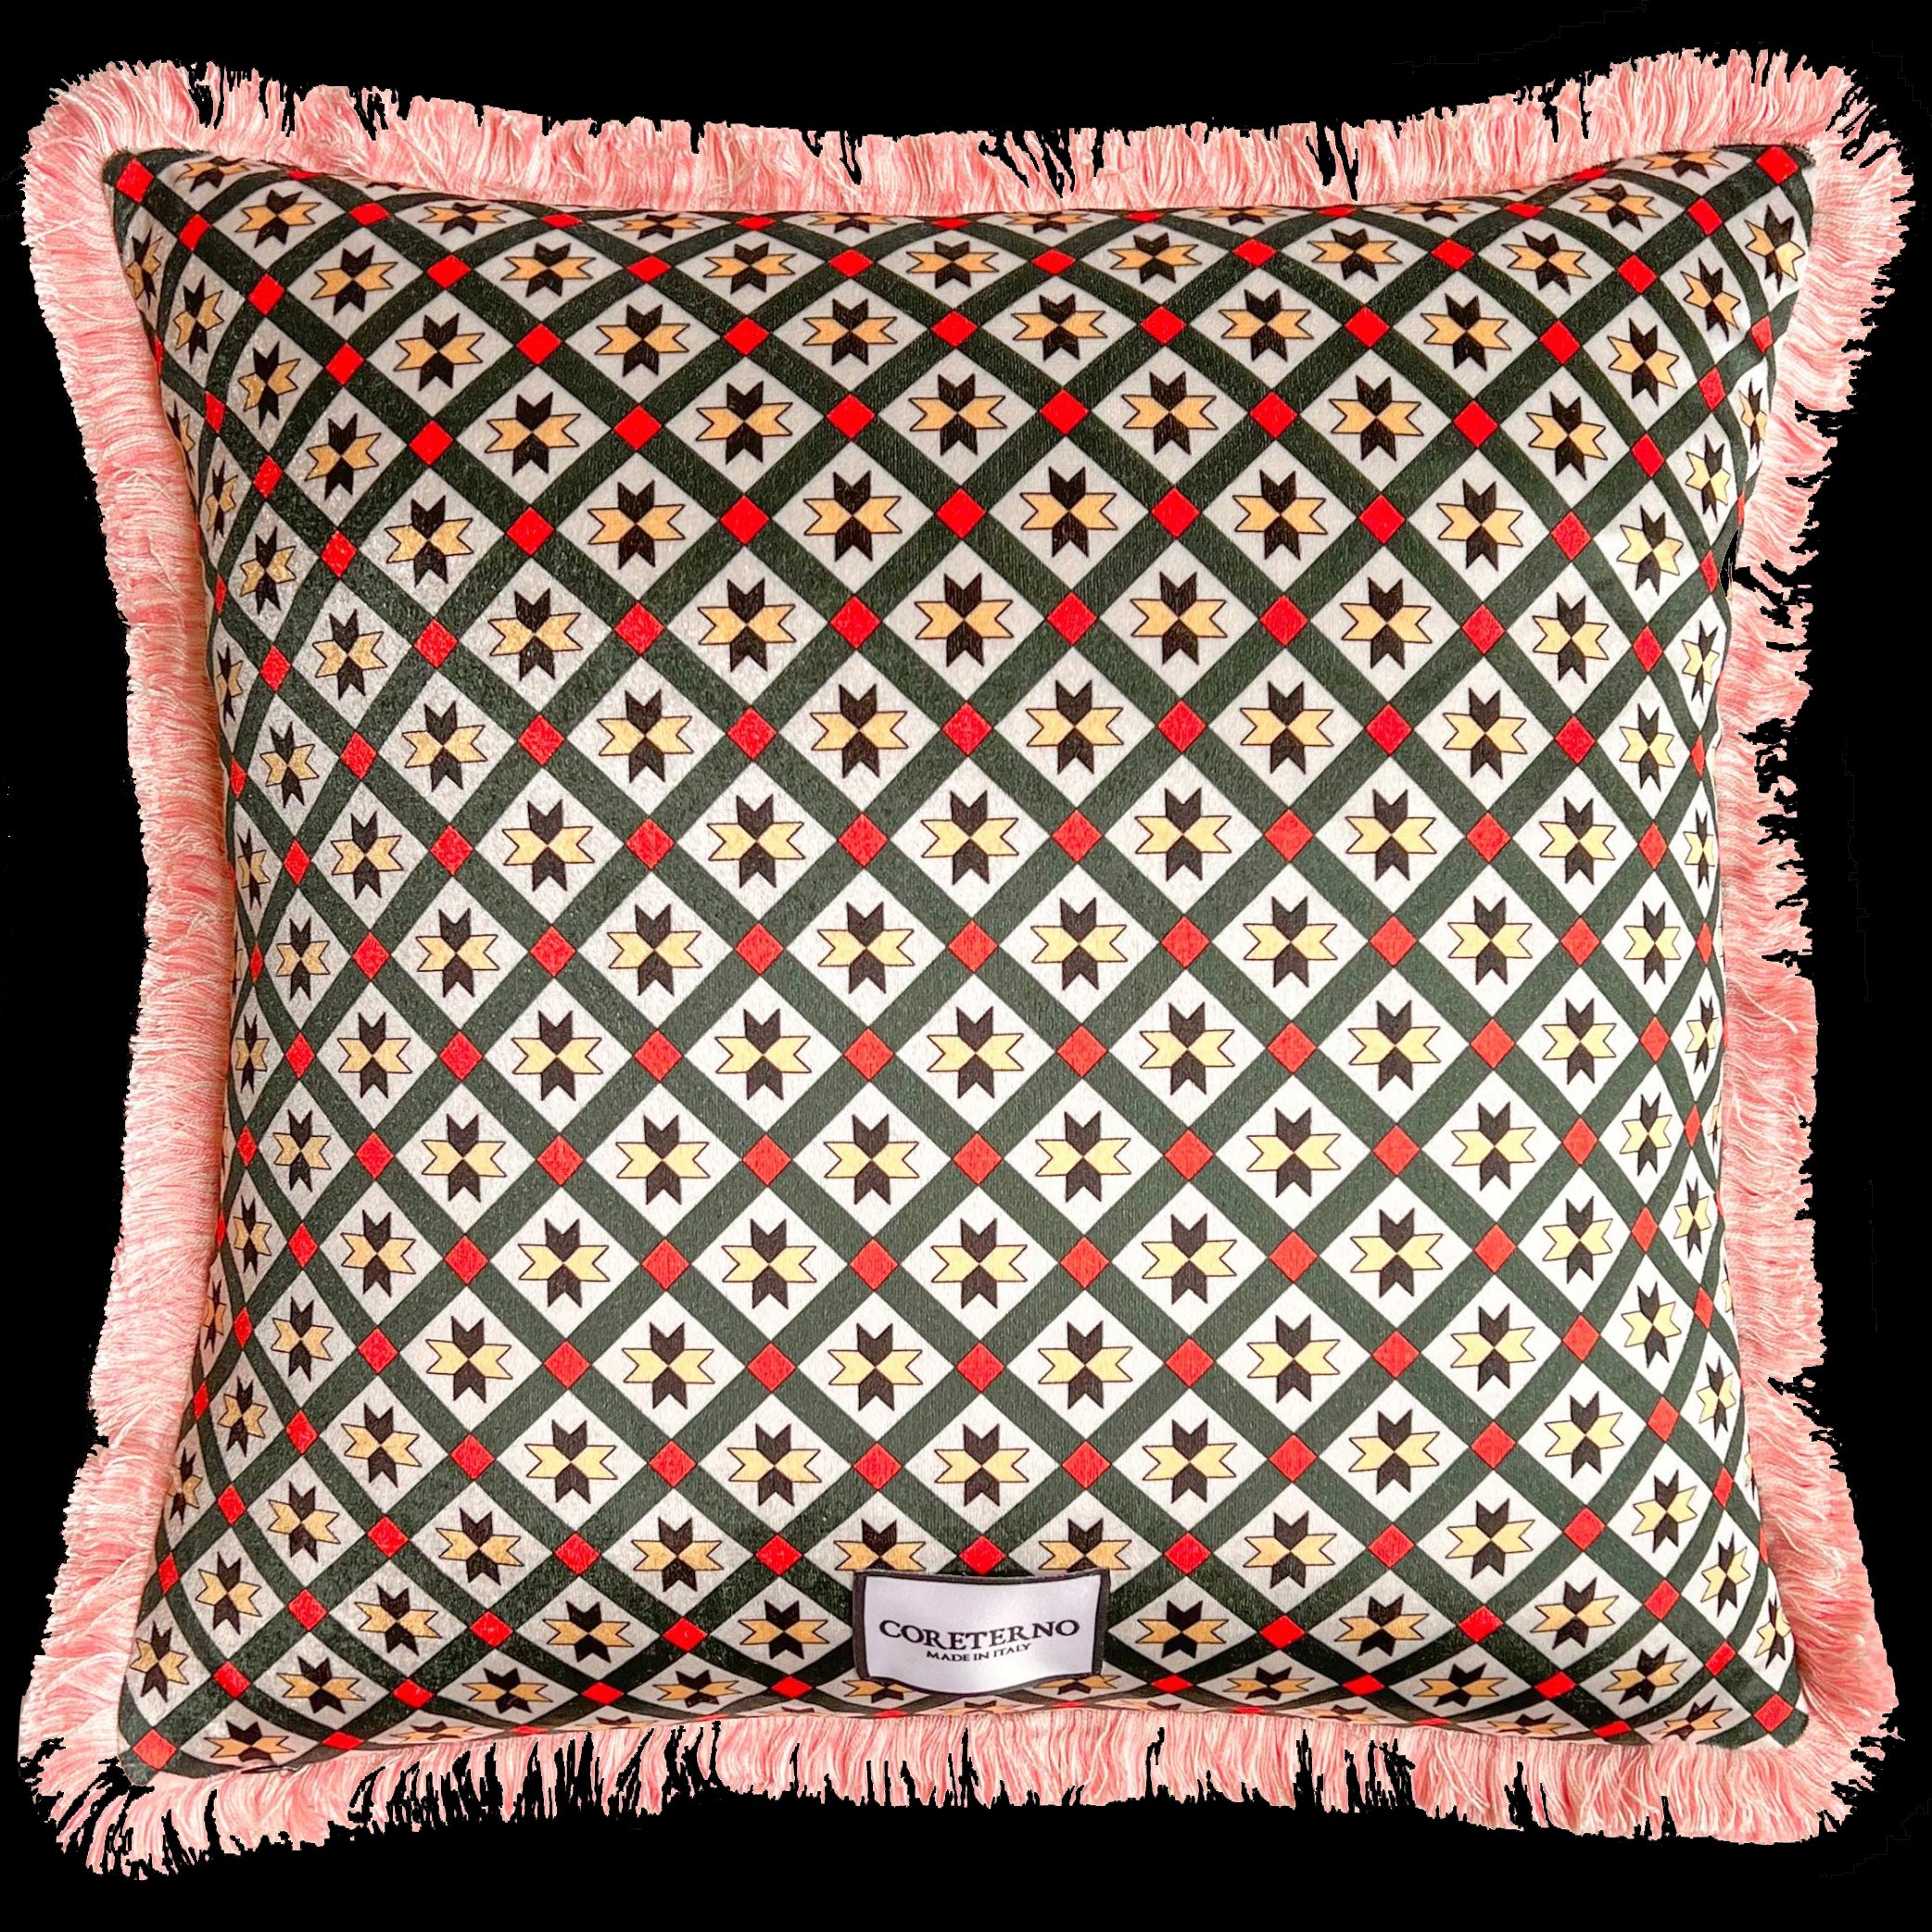 Back panel view of Porcupine cushion